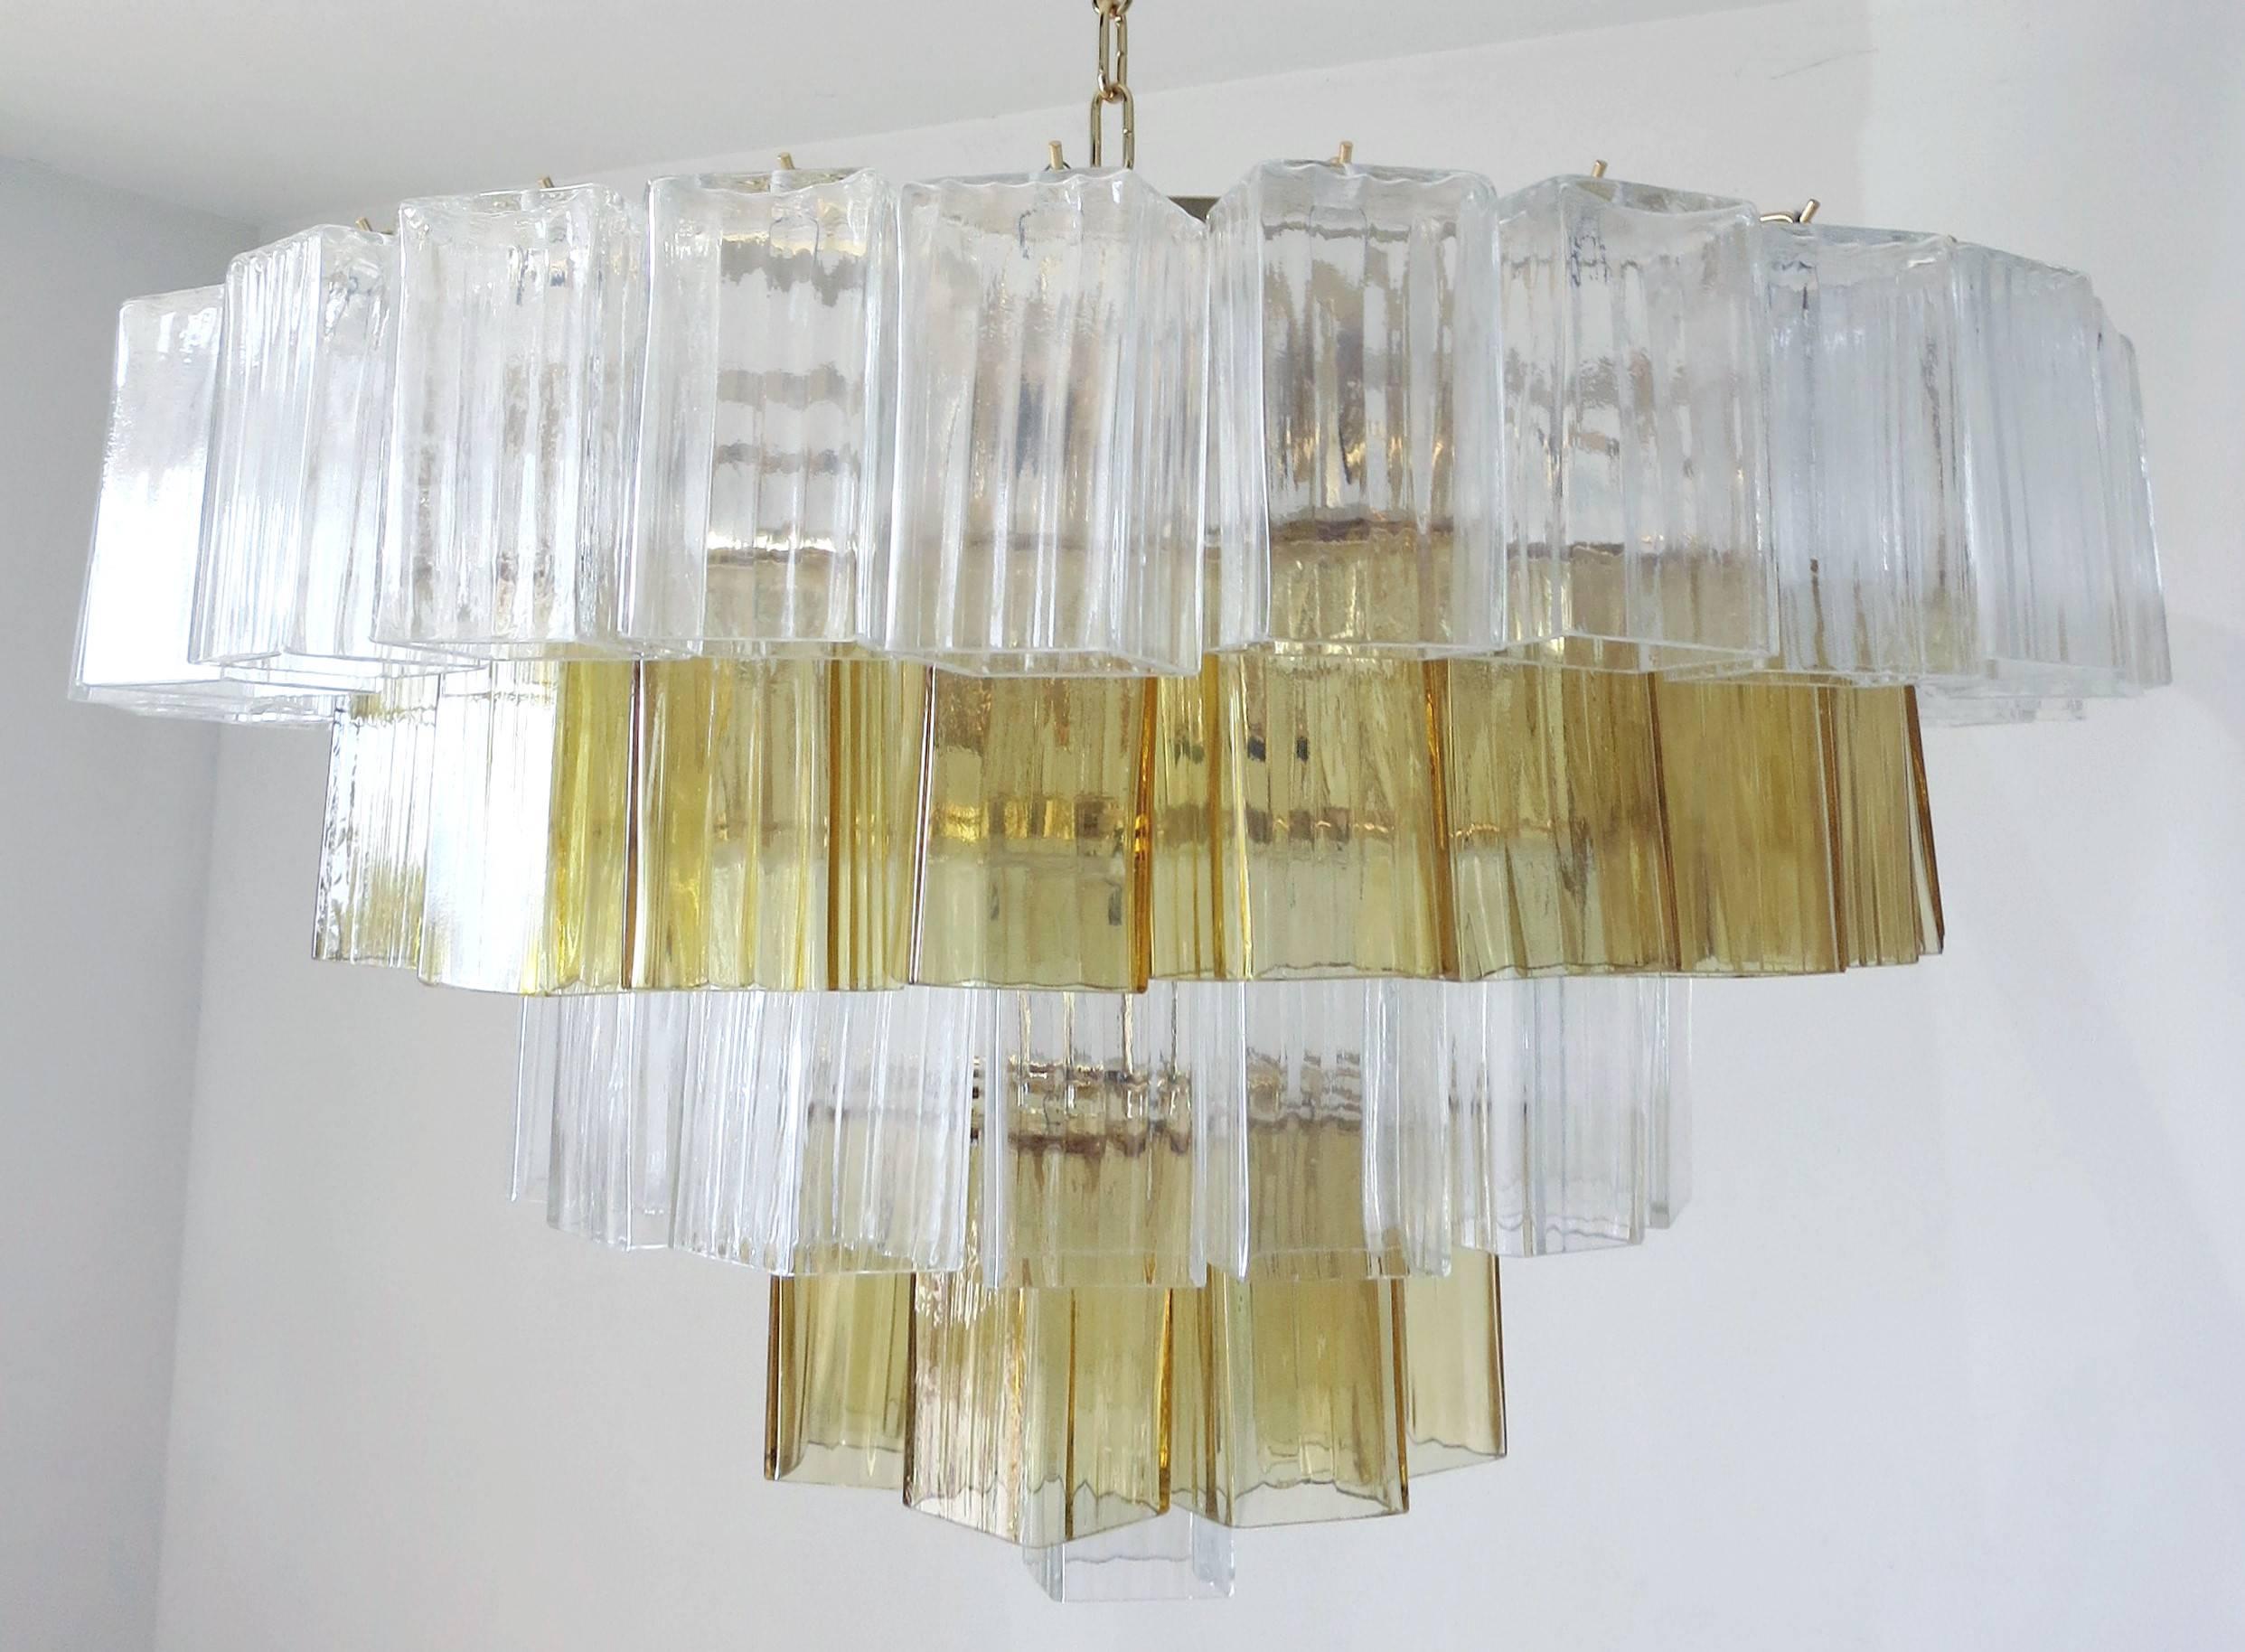 Italian Murano glass chandelier.
Vintage clear and amber hand blown Murano glass pieces, on a newly made 24-karat gold-plated frame.
Nine light sockets.

This item is located in Fabio Ltd warehouse in Italy.
Note: this item ships from Italy.